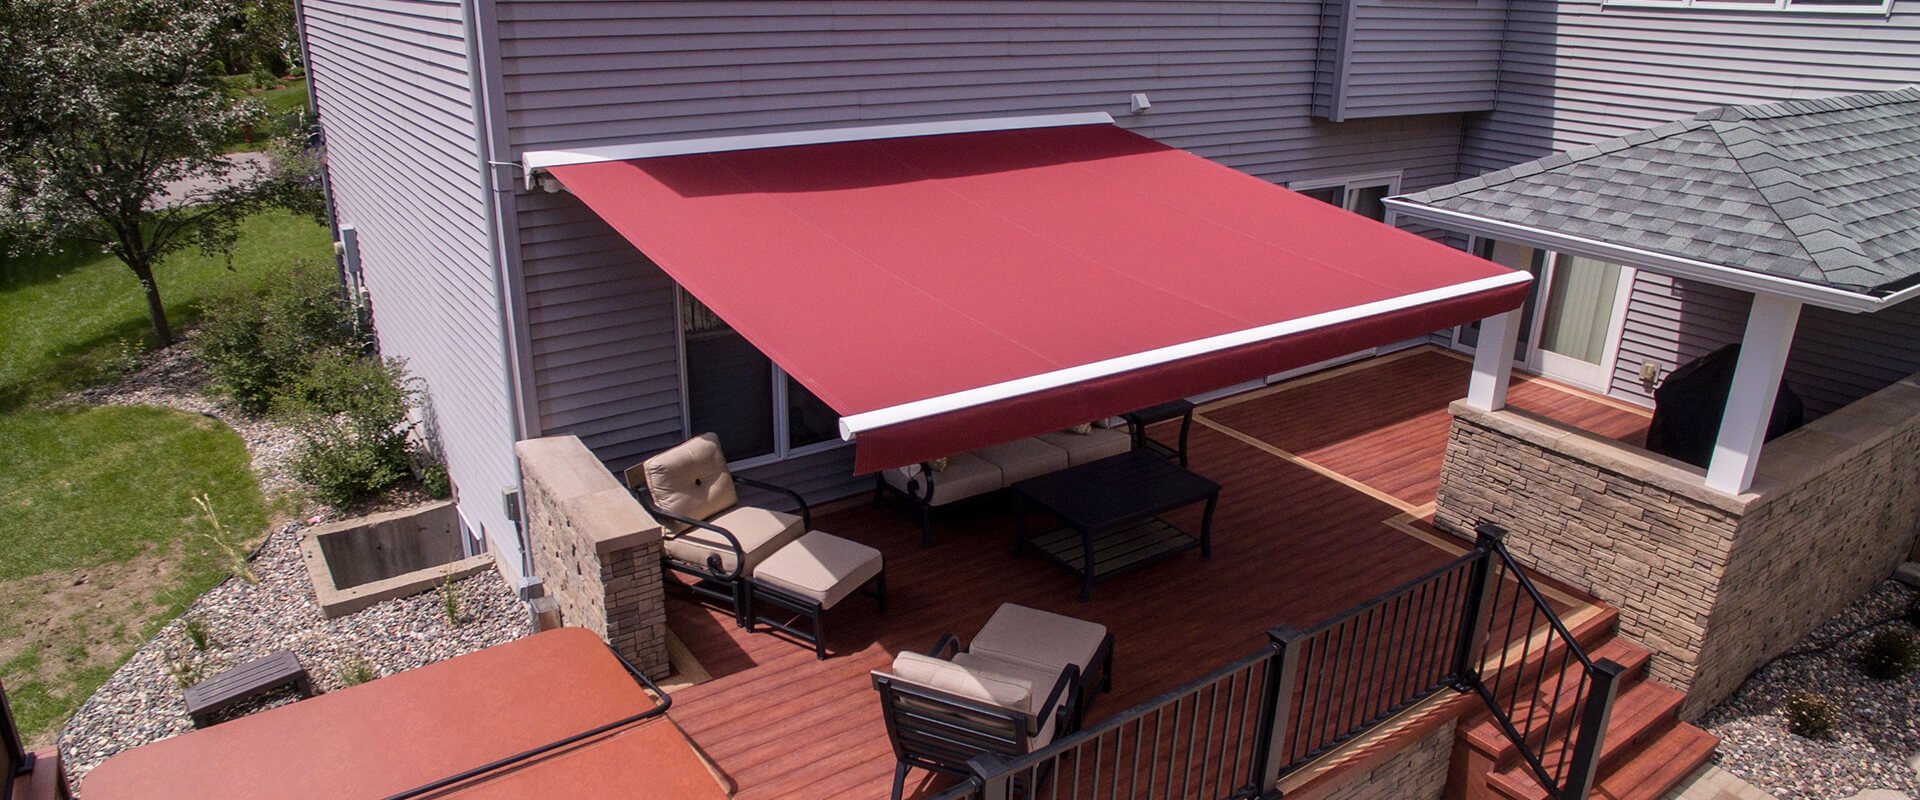 Top 5 Reasons to Choose a Retractable Awning for Your Home